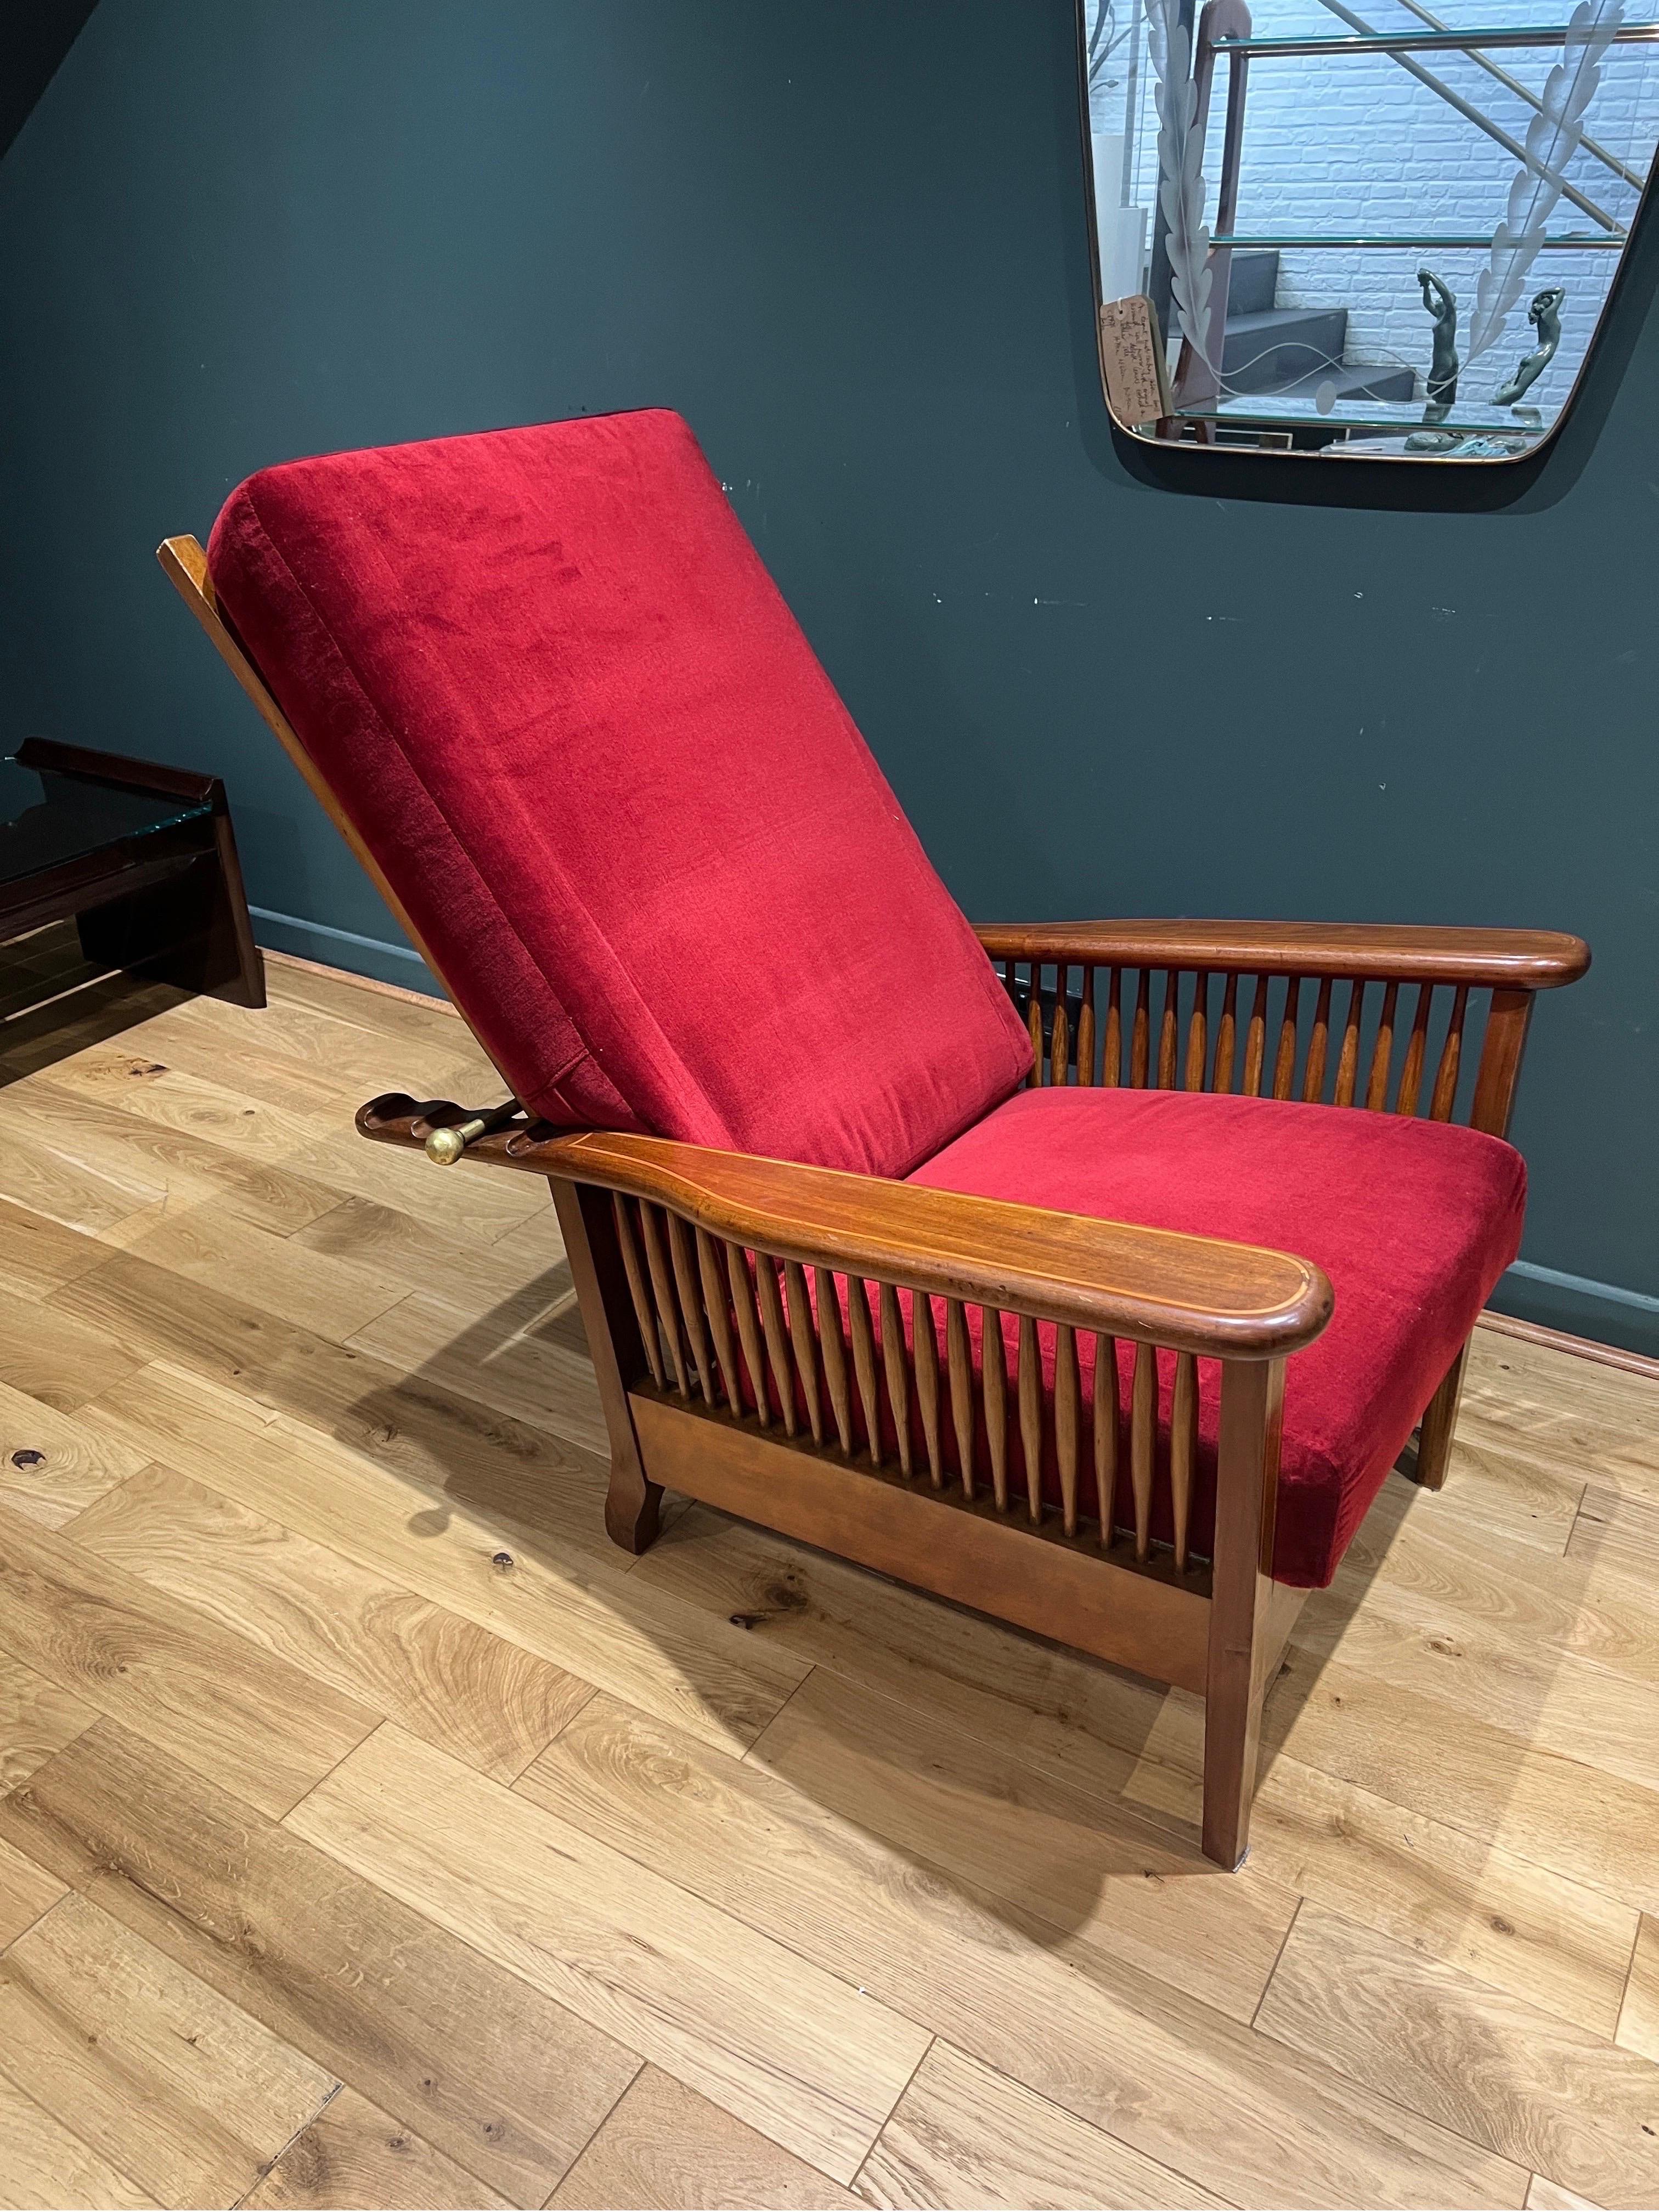 A fine Italian antiques solid walnut reclining campaign armchair. The back seat is supported by an adjustable single solid brass bar allowing it to alternate the recline into four different positions. Both cushions are removable and the back seat